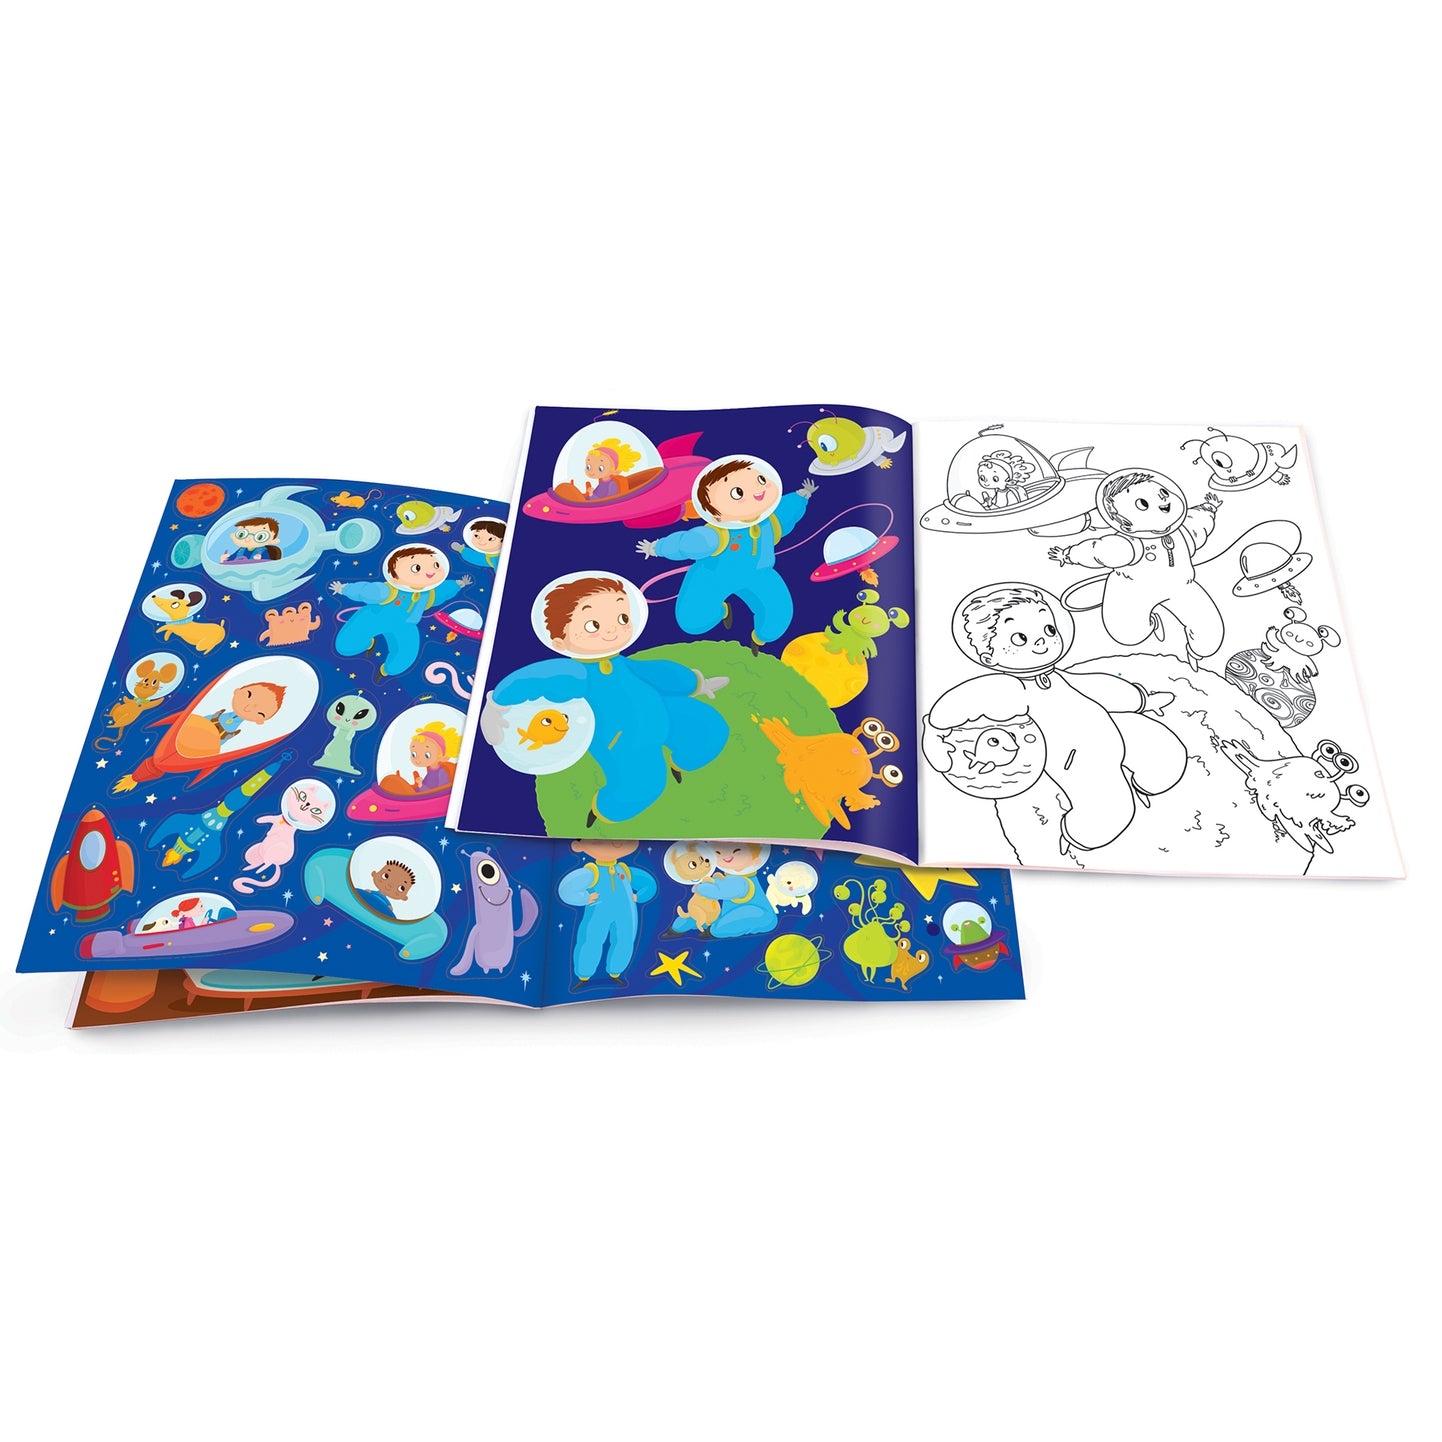 The Piggy Story Glitter Doodle Gel Crayons - Space Adventure